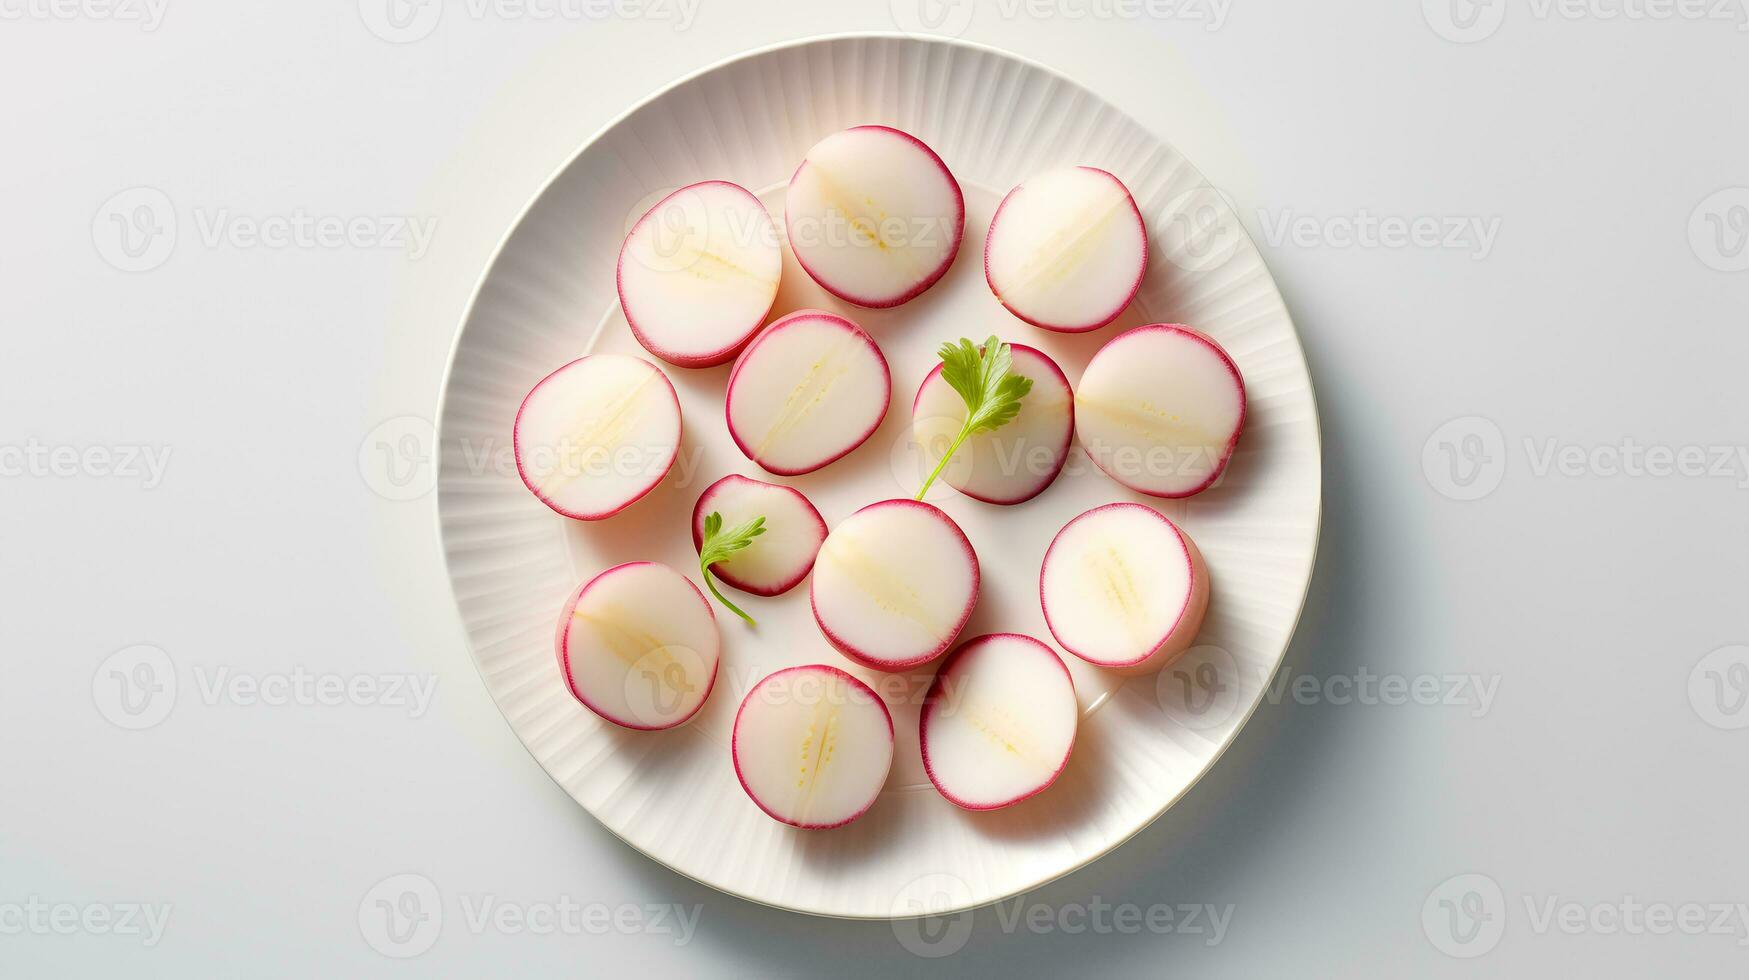 Photo of Turnips sliced pieces on minimalist plate isolated on white background